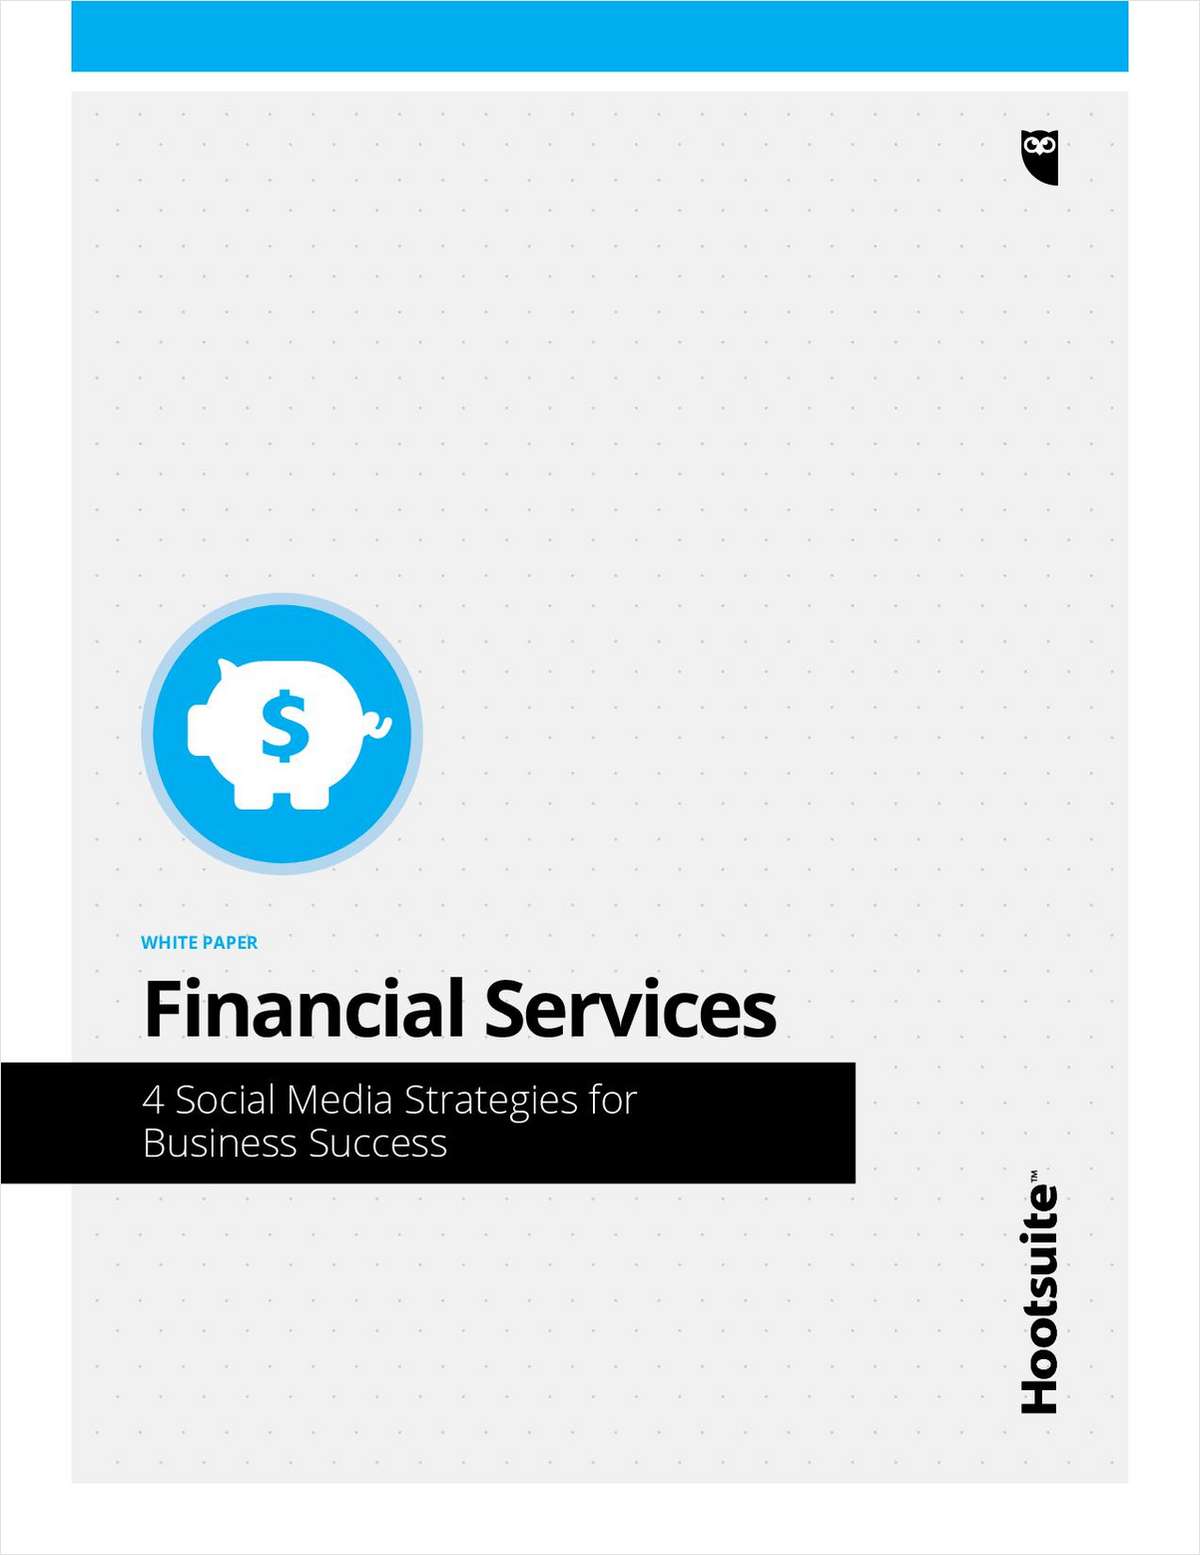 Financial Services: 4 Social Media Strategies for Business Success